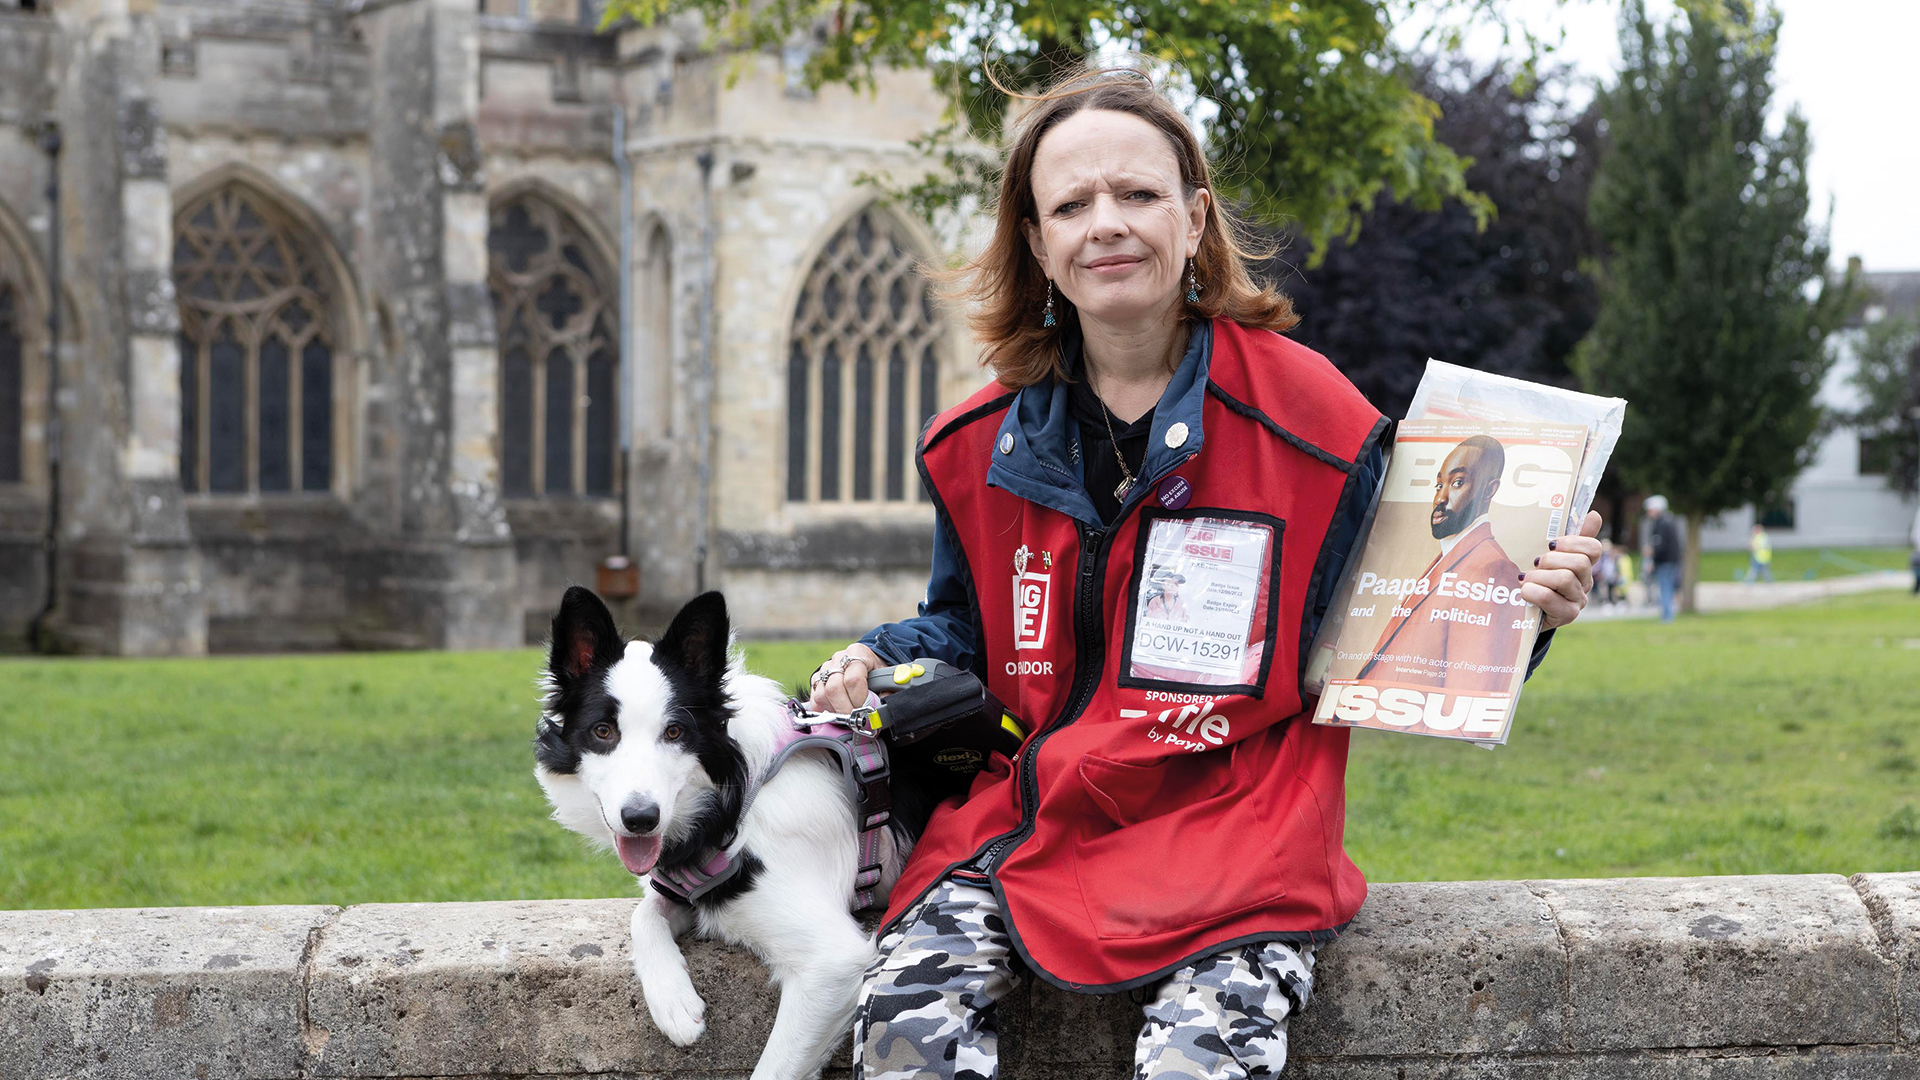 A big issue vendor and her black and white dog outside a church